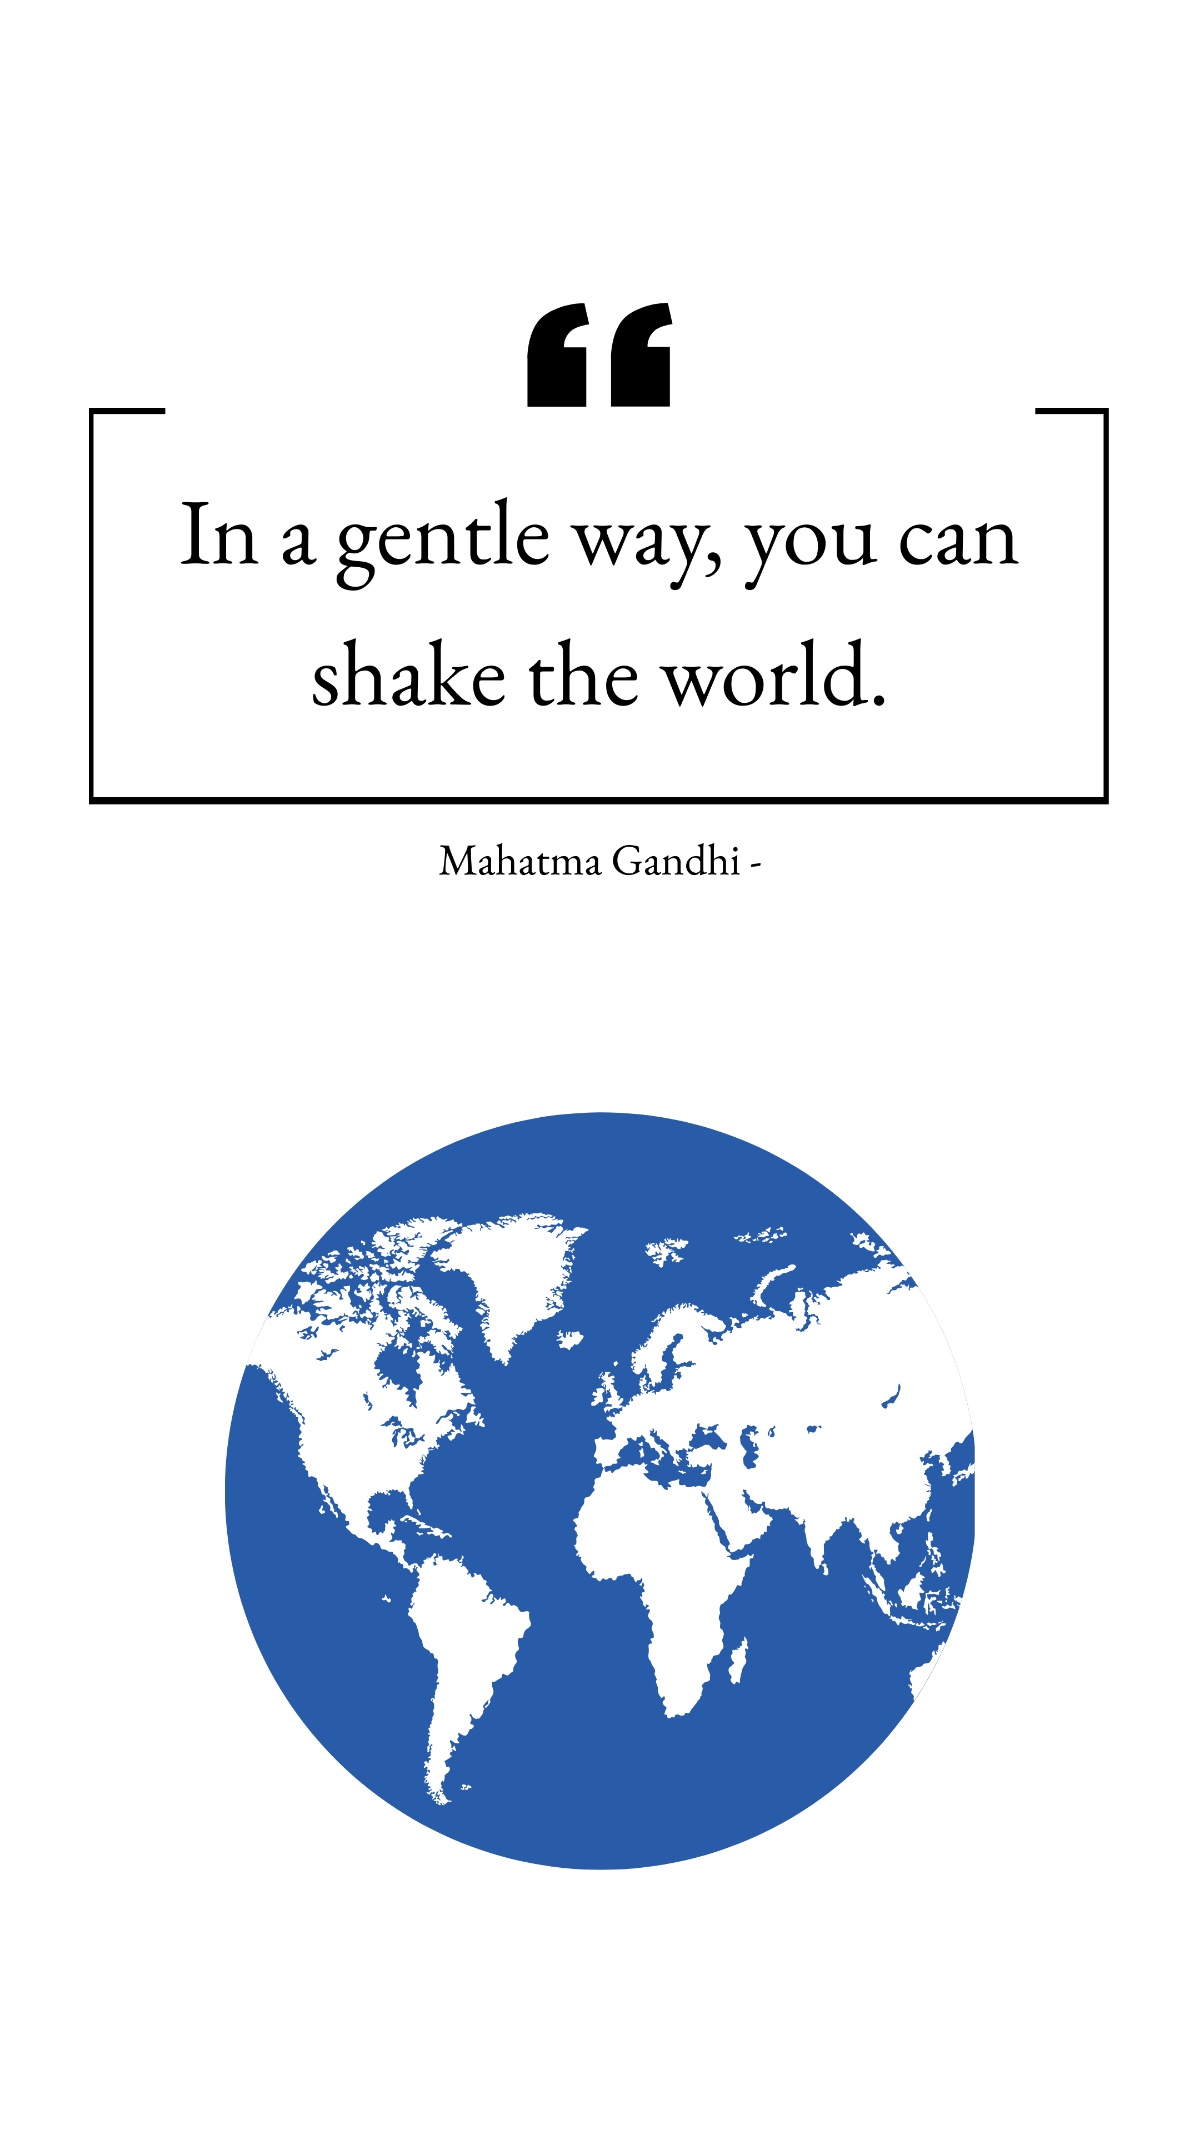 Mahatma Gandhi - In a gentle way, you can shake the world. Template